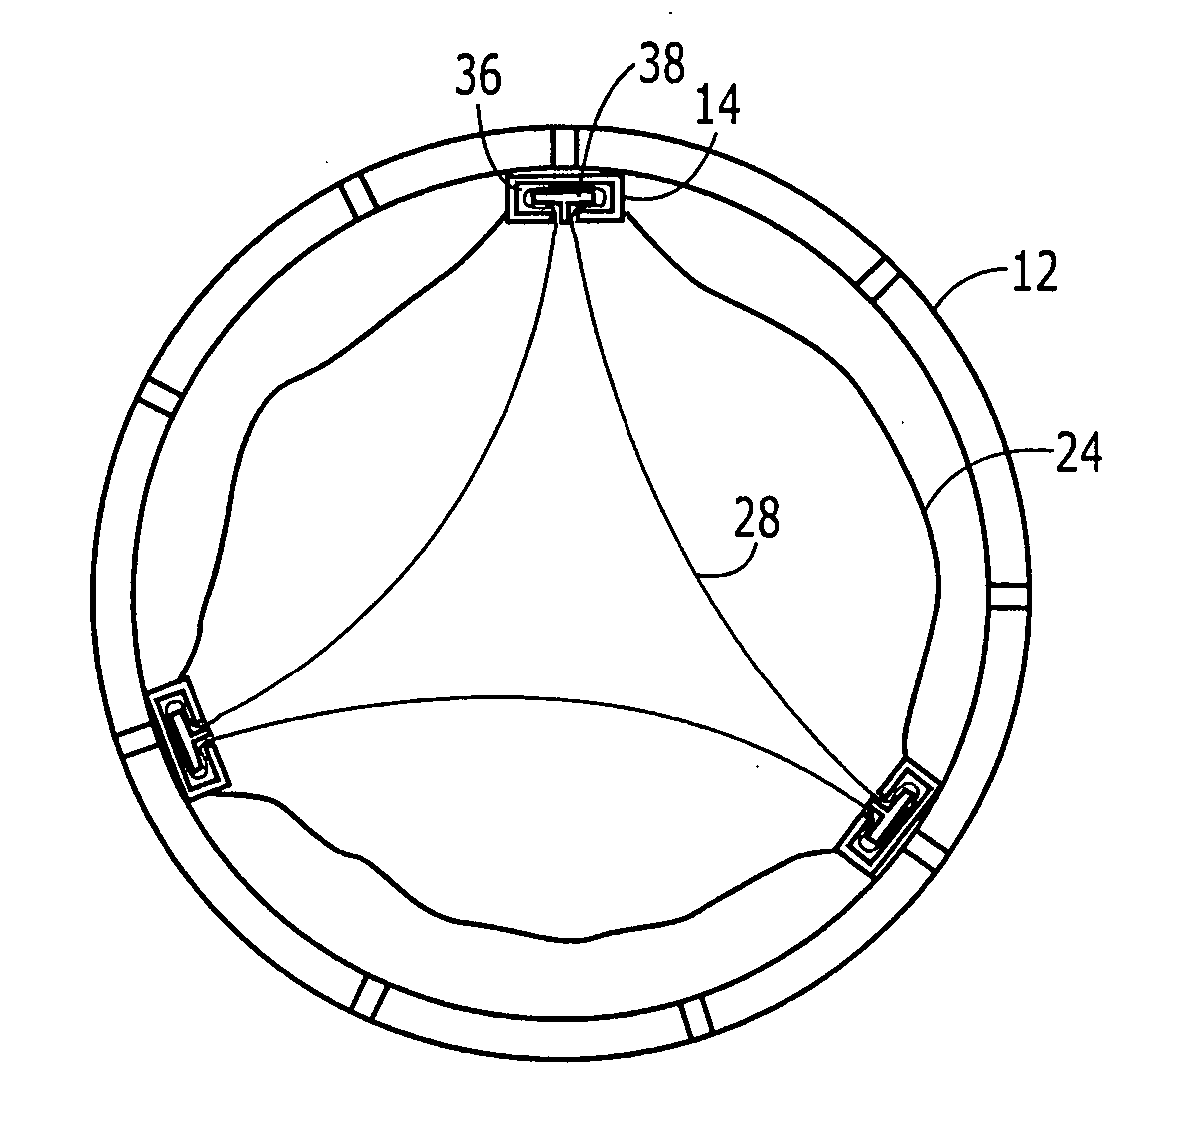 Heart valve and method for insertion of the heart valve into a bodily vessel